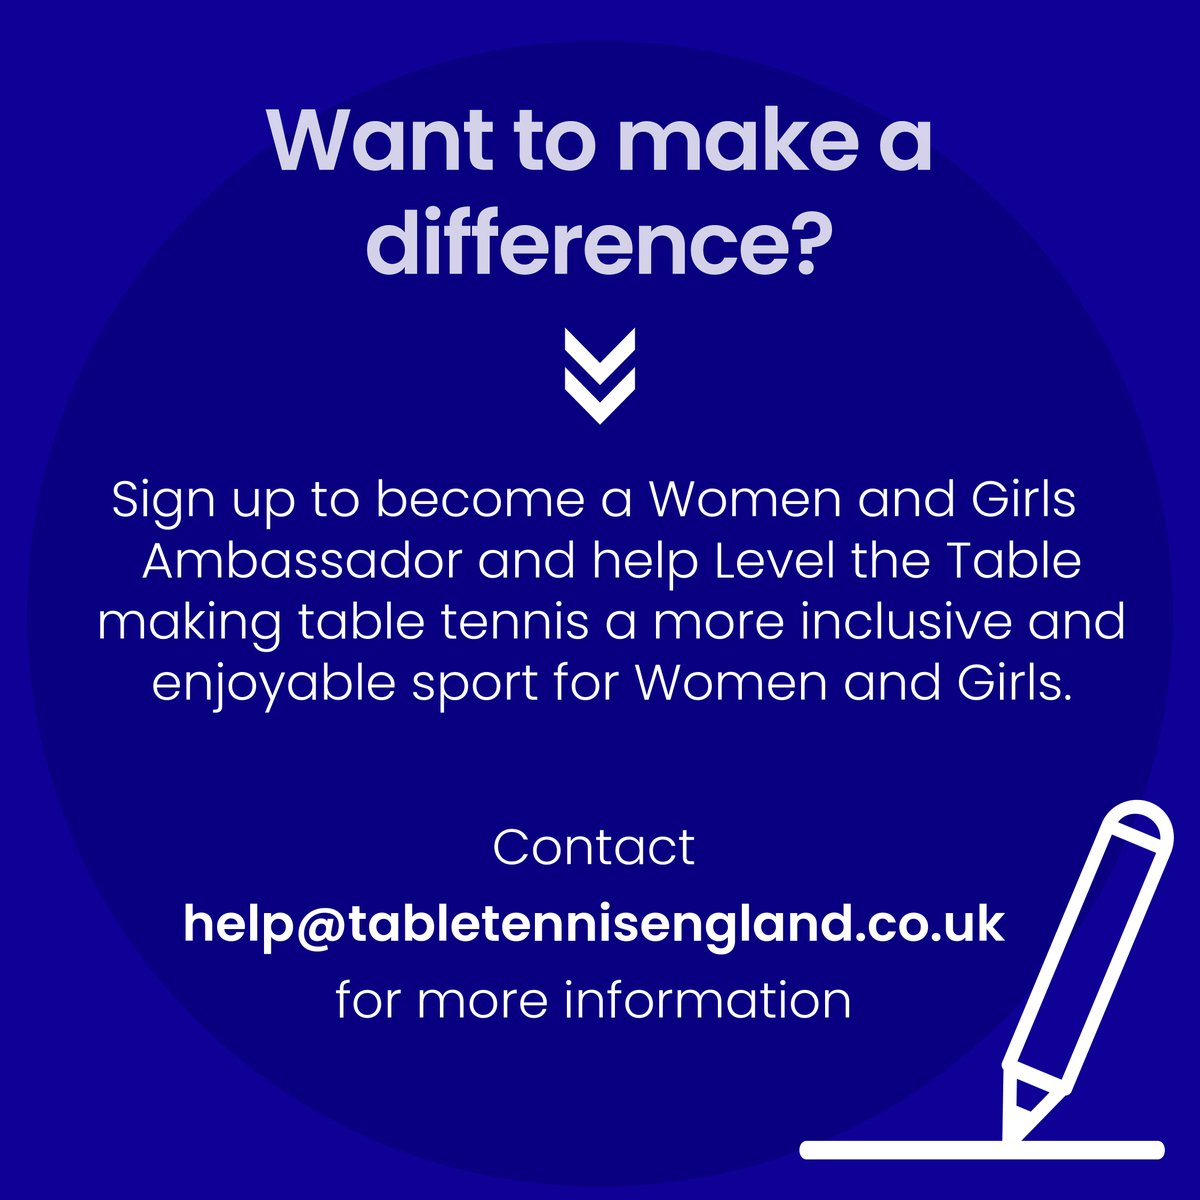 On #InternationalWomensDay, we hosted an insight session to understand the challenges that women and girls face in #tabletennis. Our Women and Girls Ambassador Programme aims to address these challenges. Find out more here 👉loom.ly/7y0Y4PY